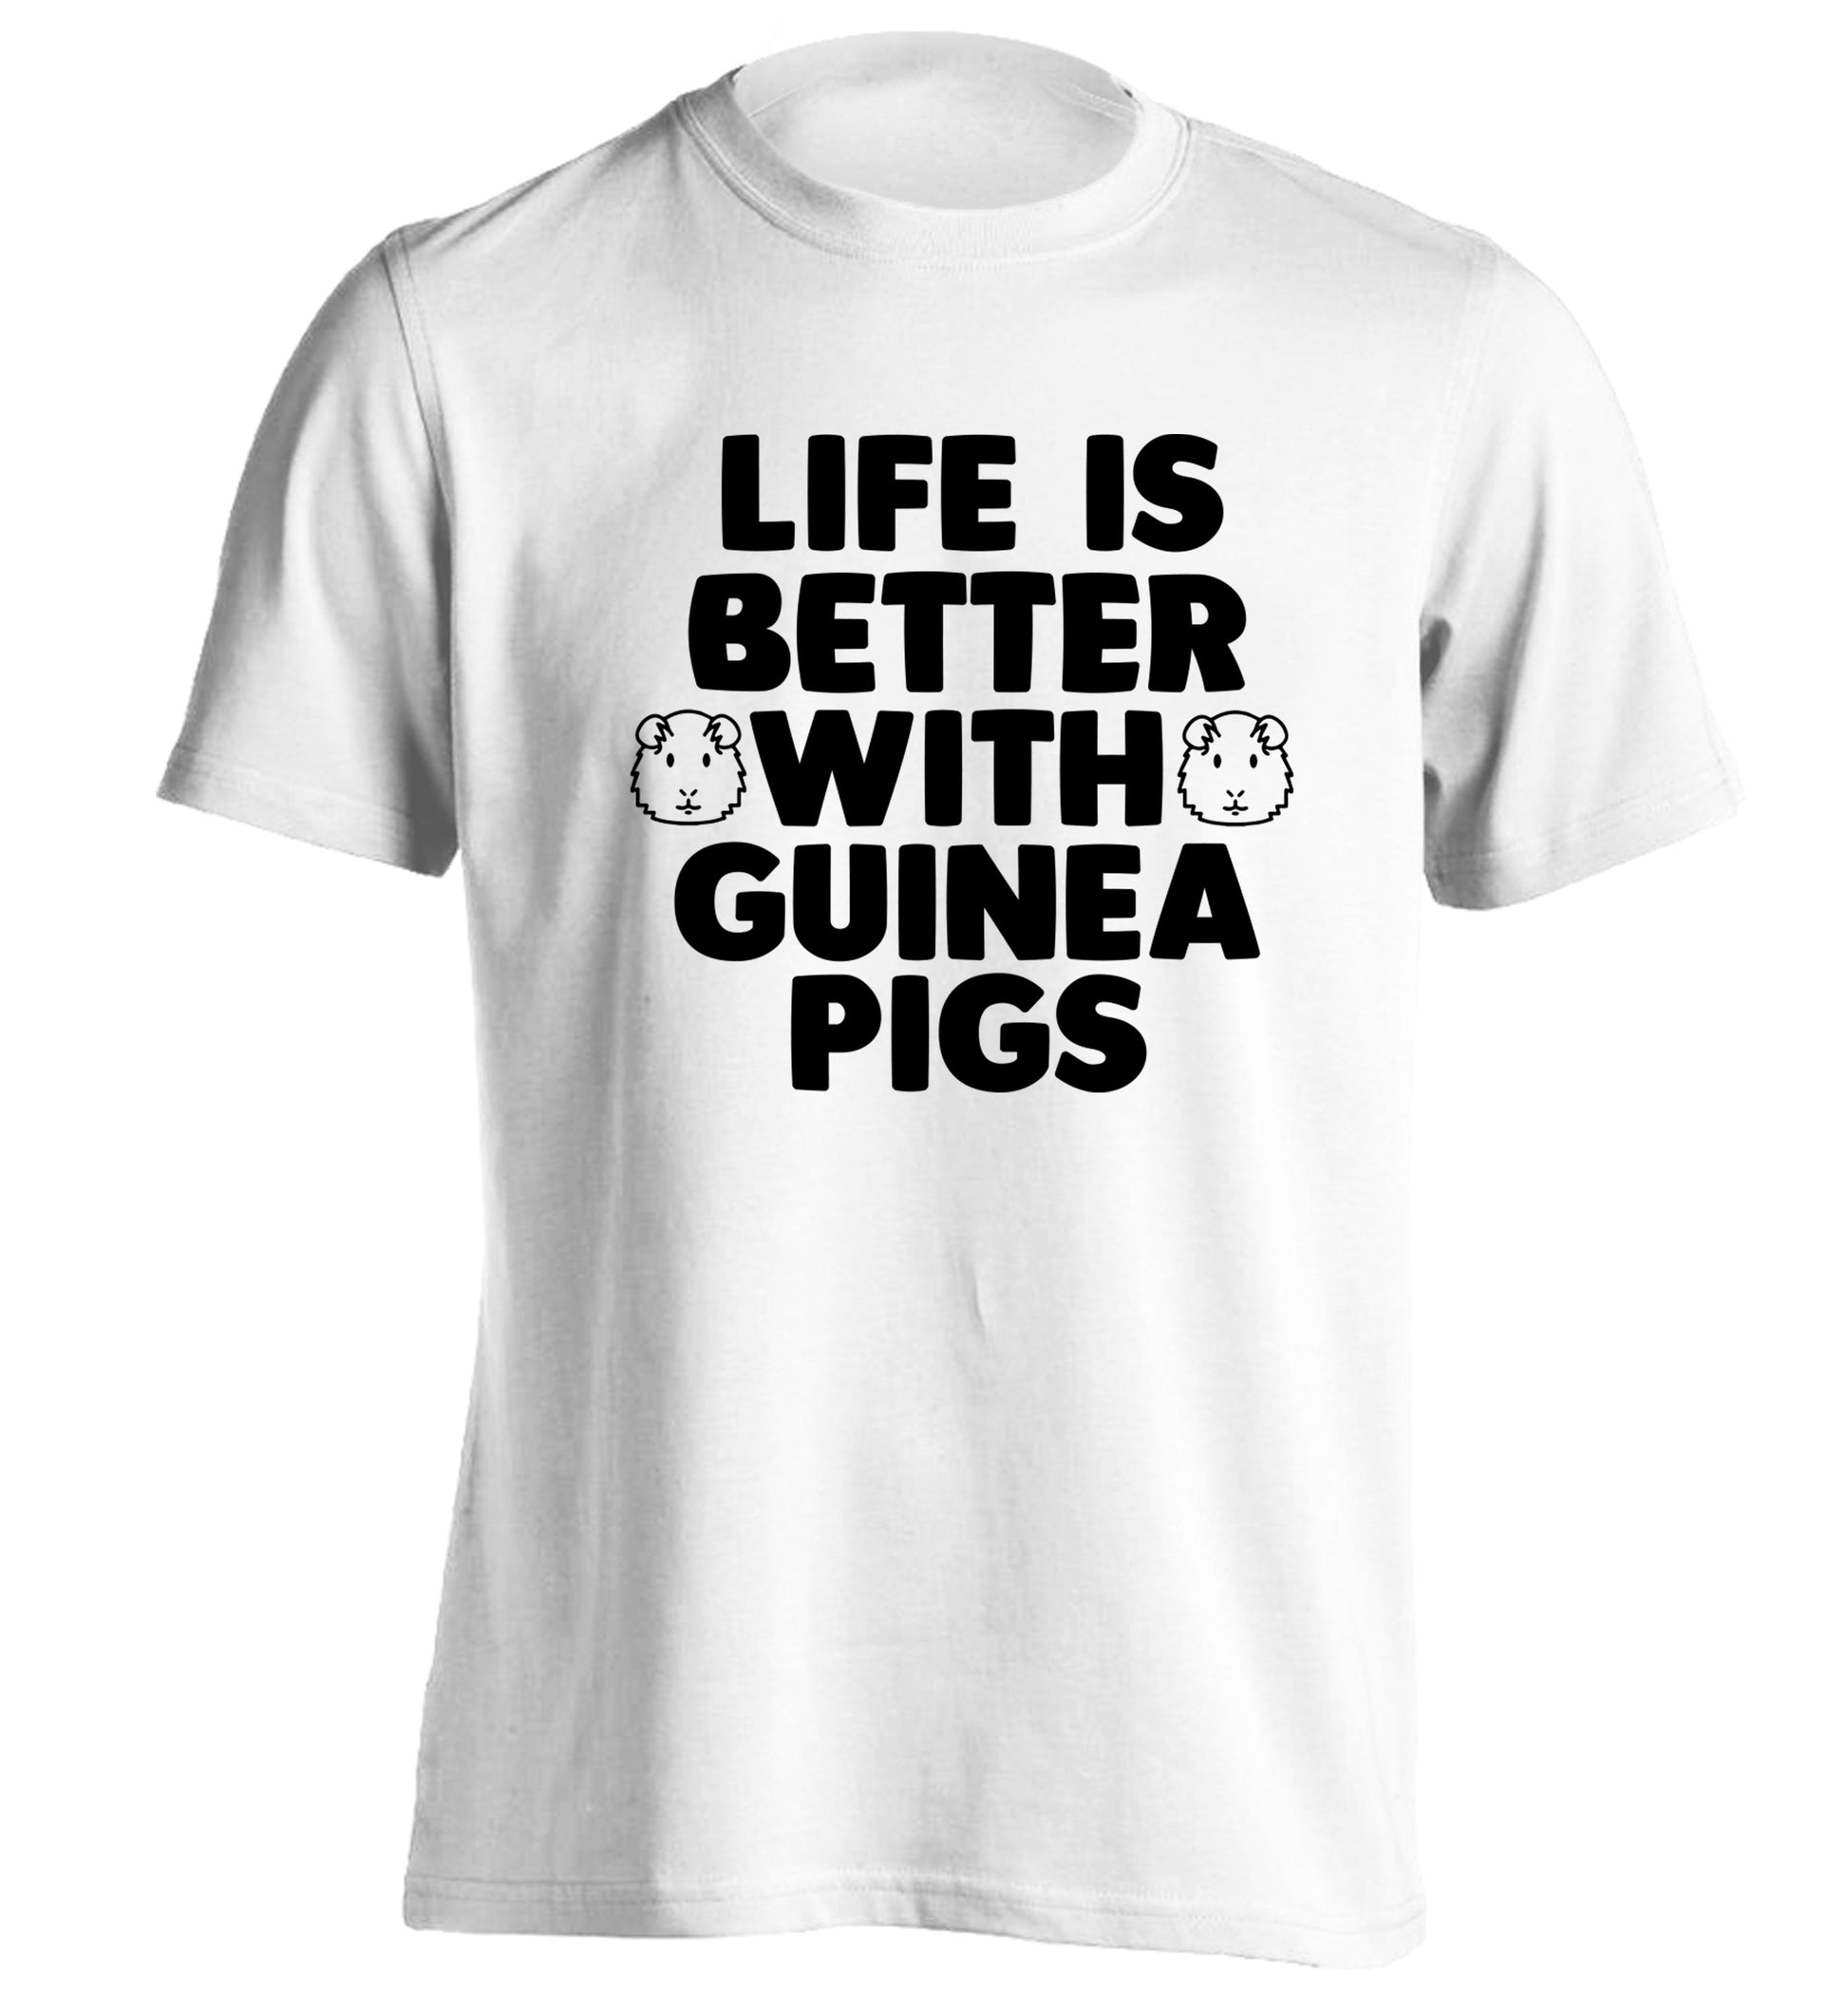 Life is better with guinea pigs adults unisex white Tshirt 2XL